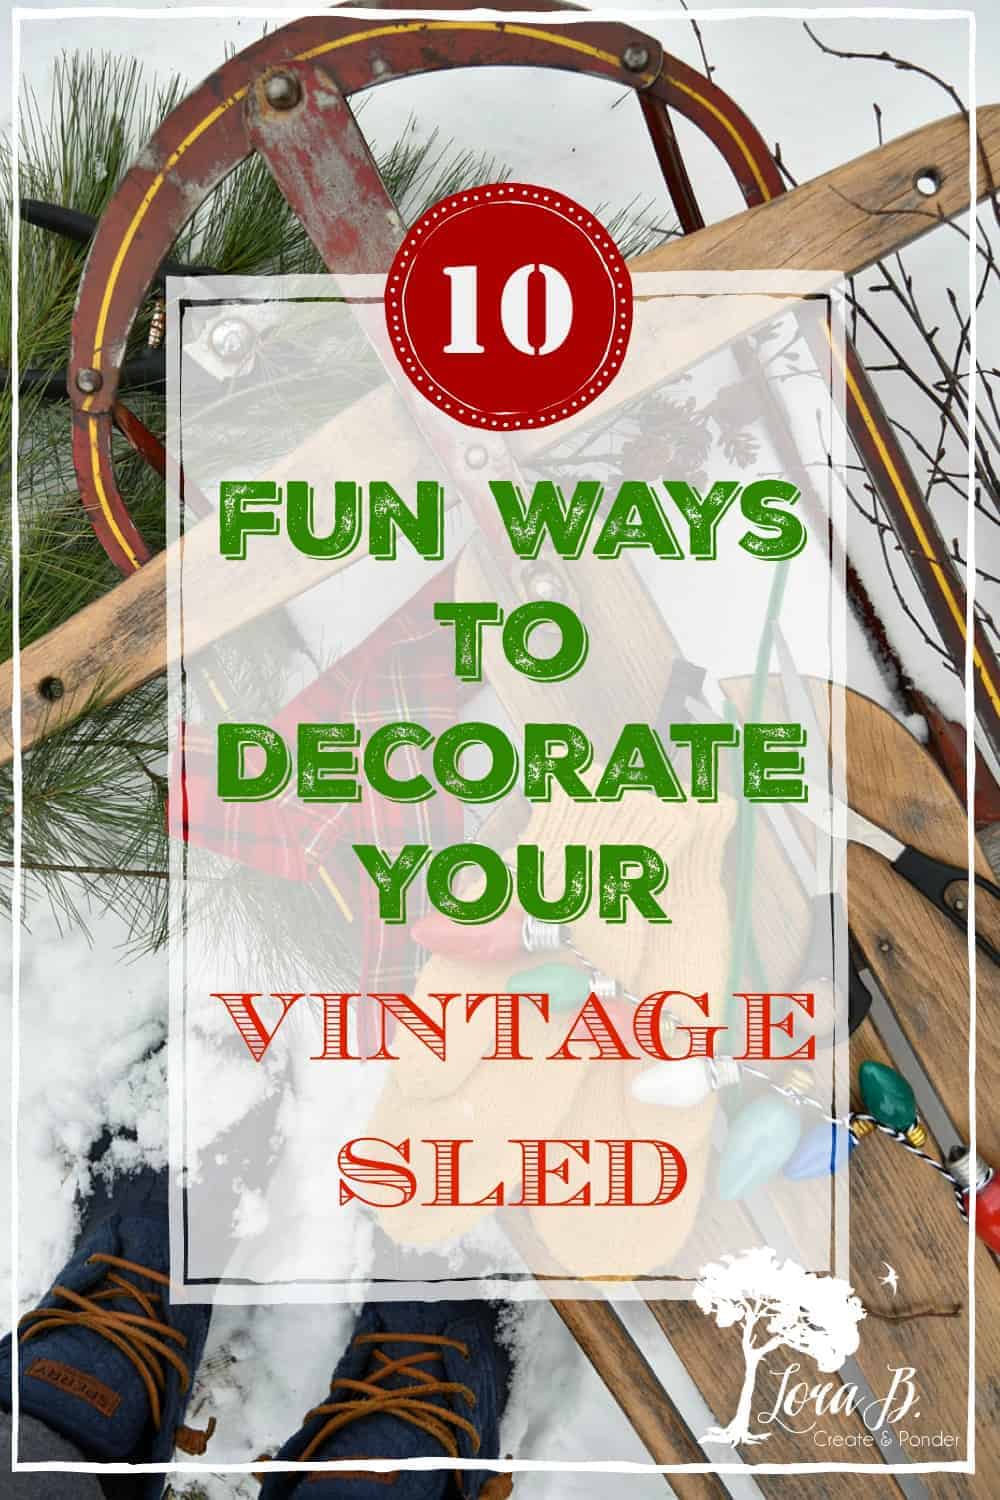 10 Ways To Decorate a Vintage Sled